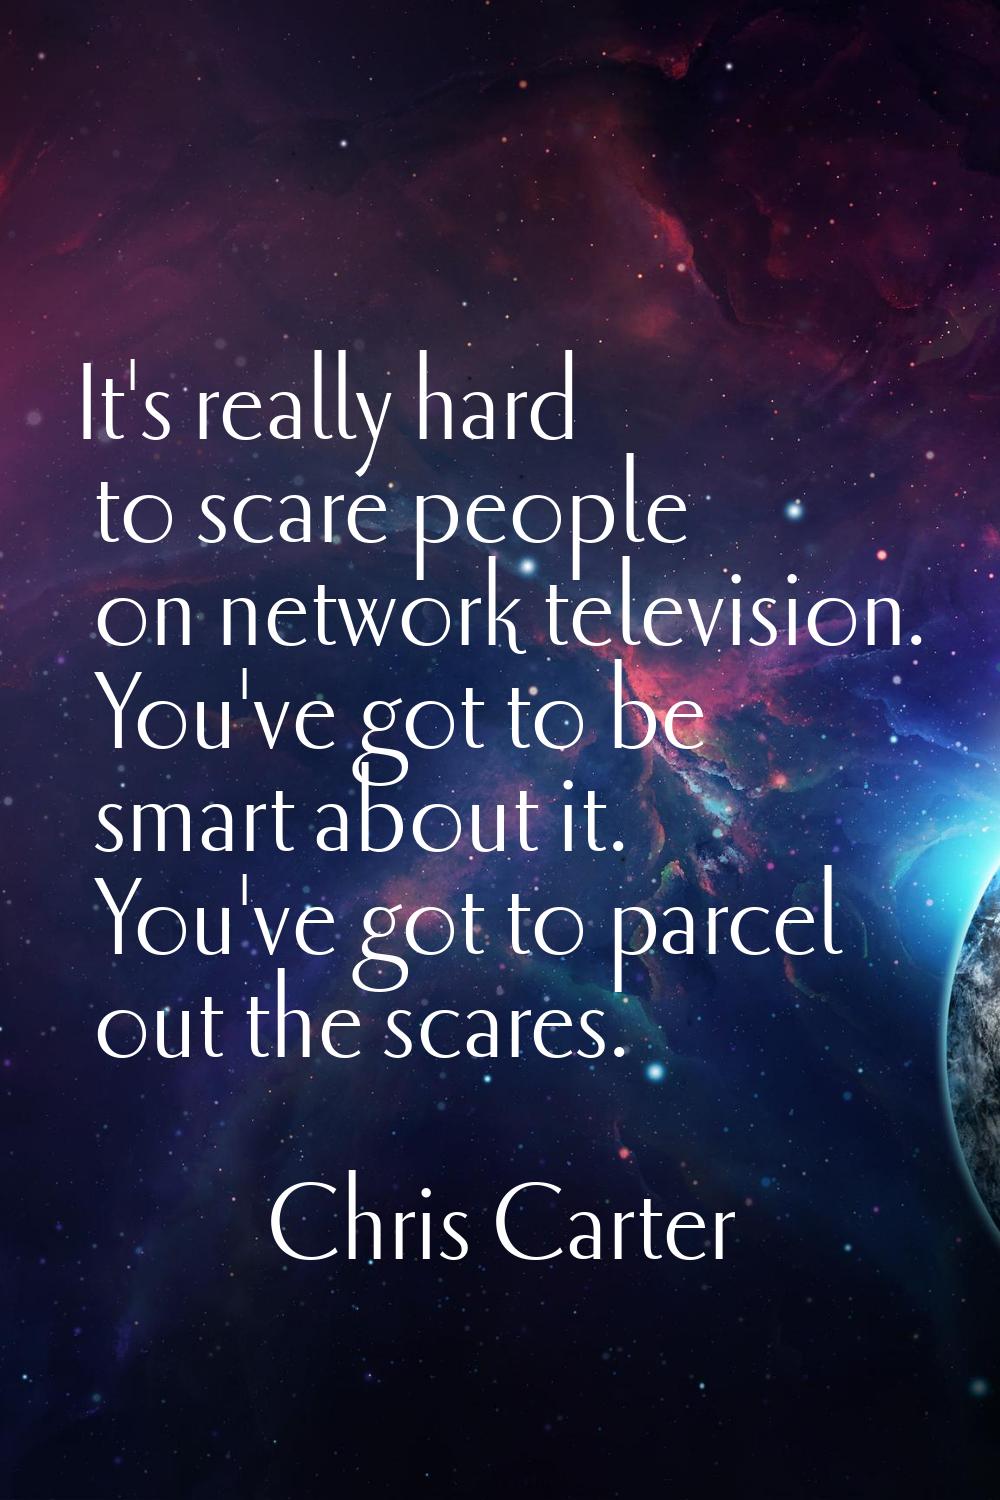 It's really hard to scare people on network television. You've got to be smart about it. You've got